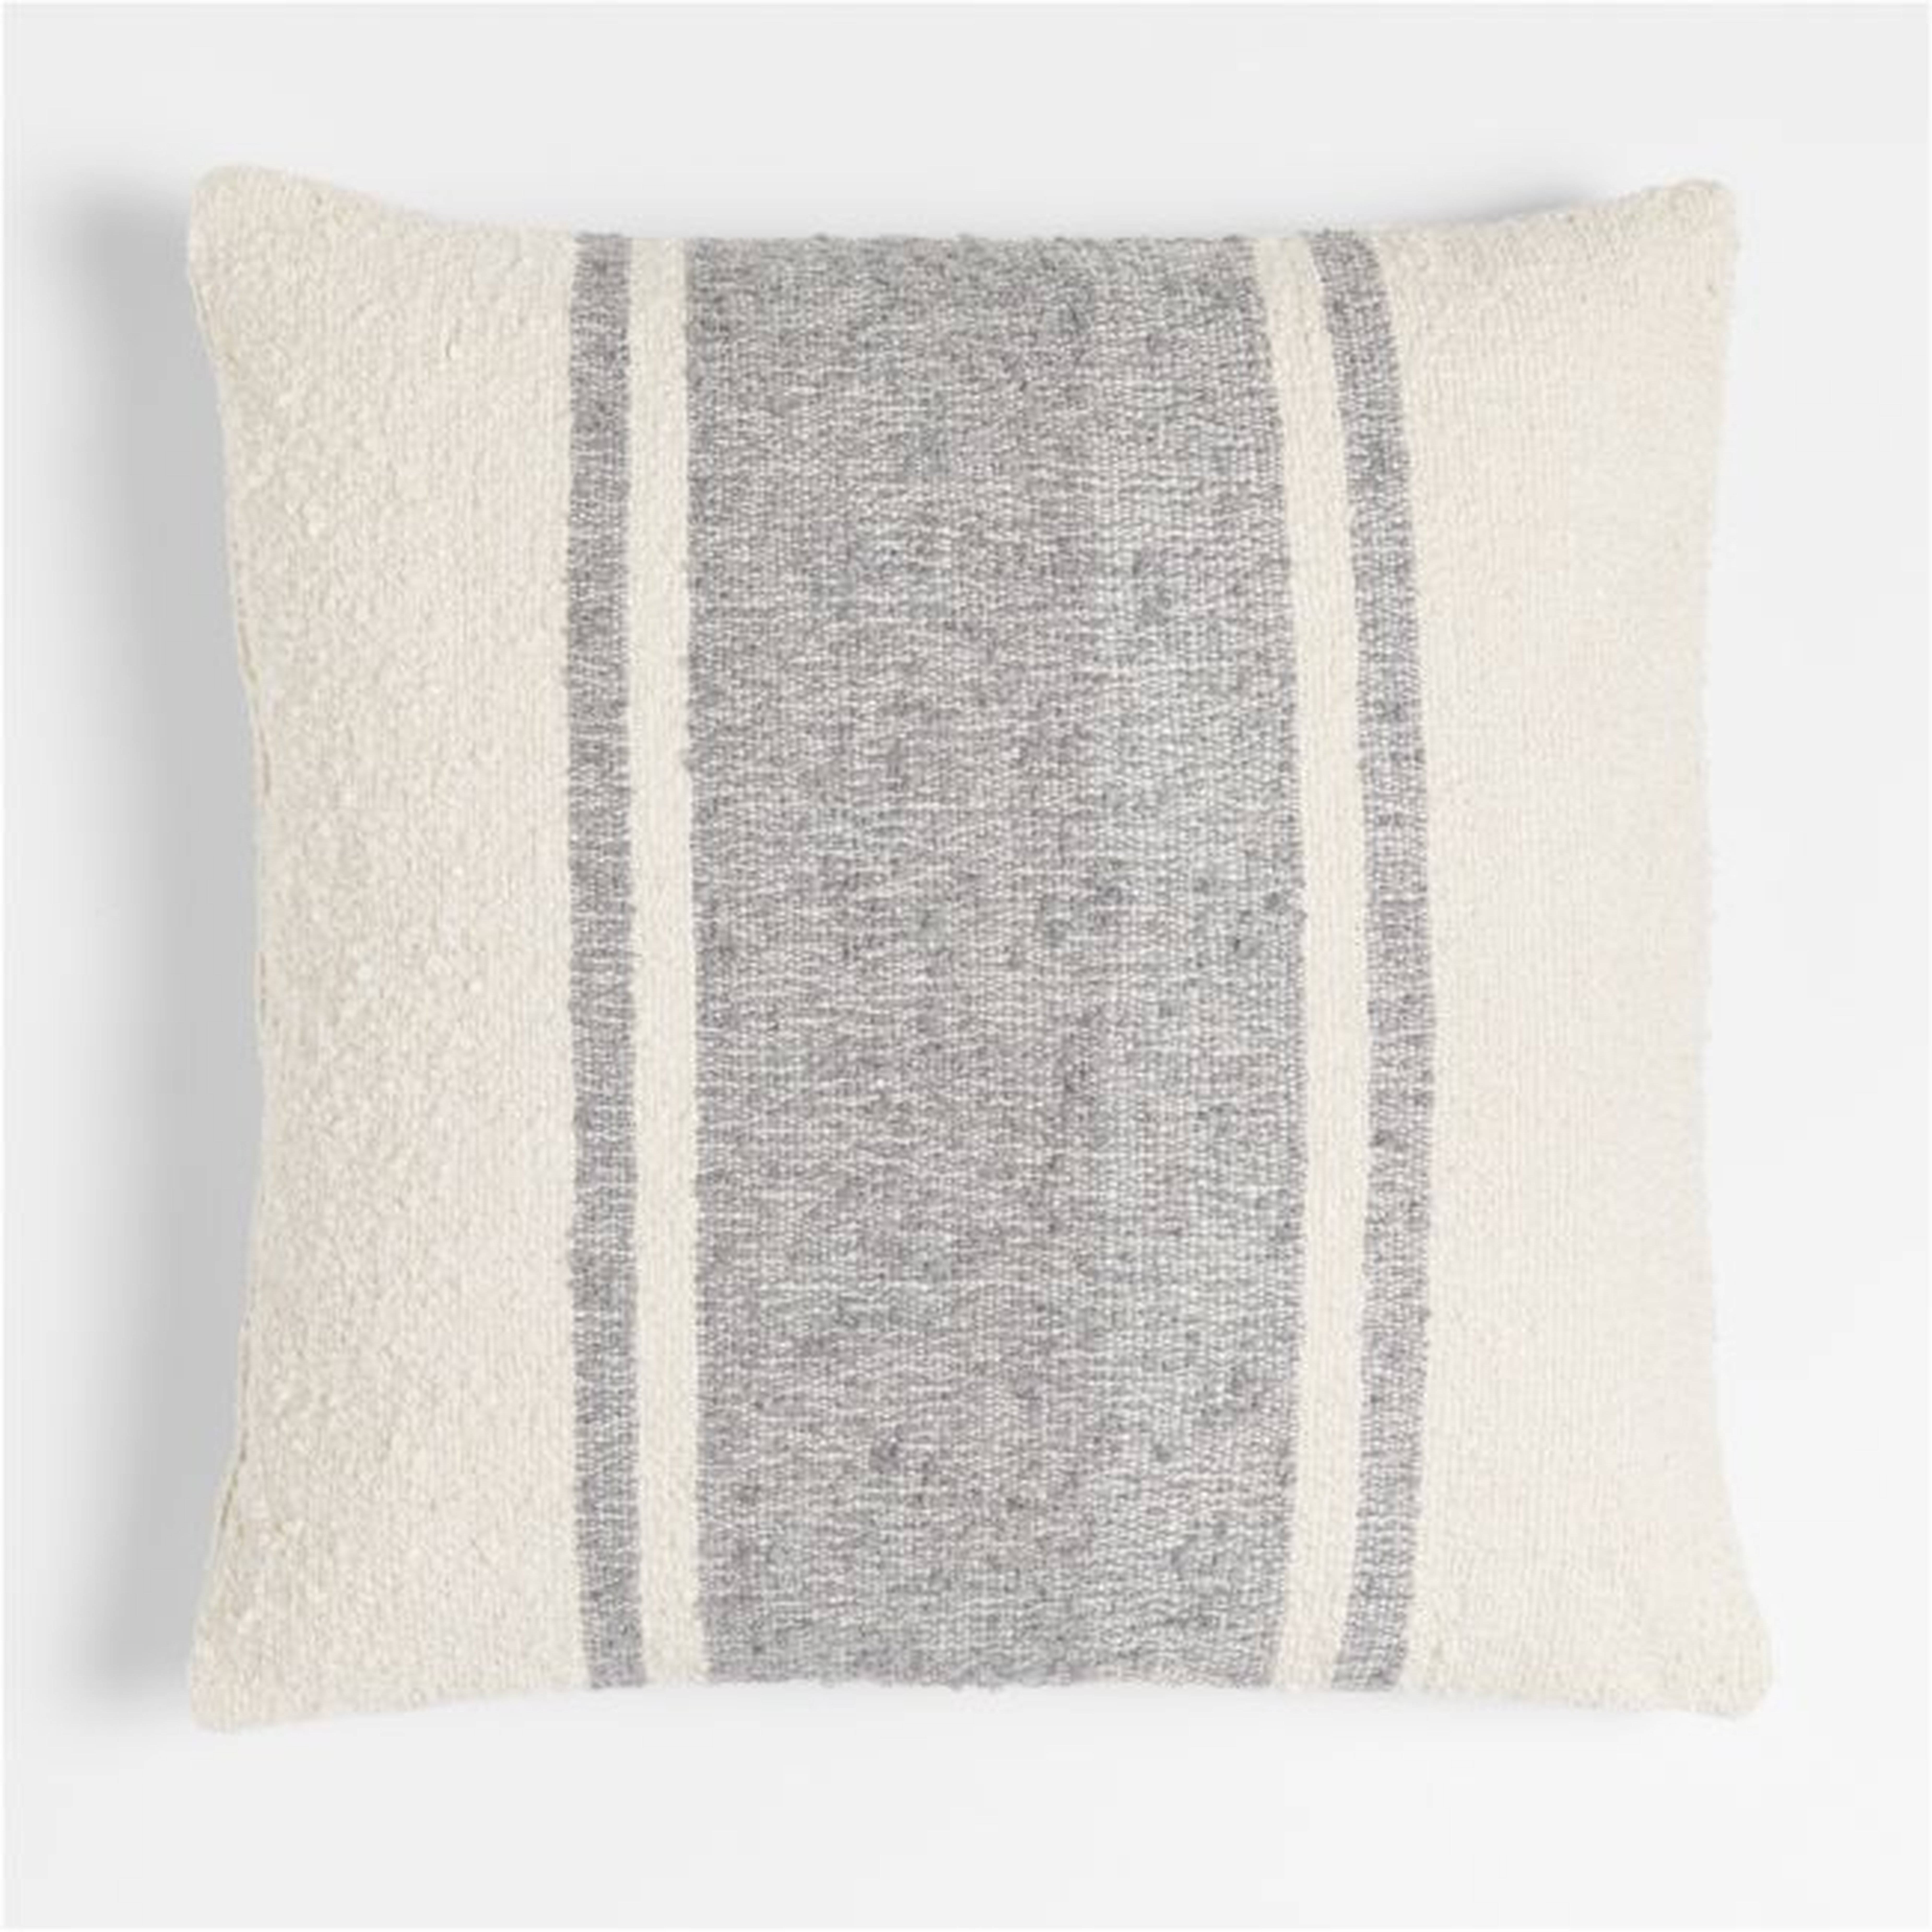 Persimmon 23" Grey Stripe Outdoor Pillow - Crate and Barrel